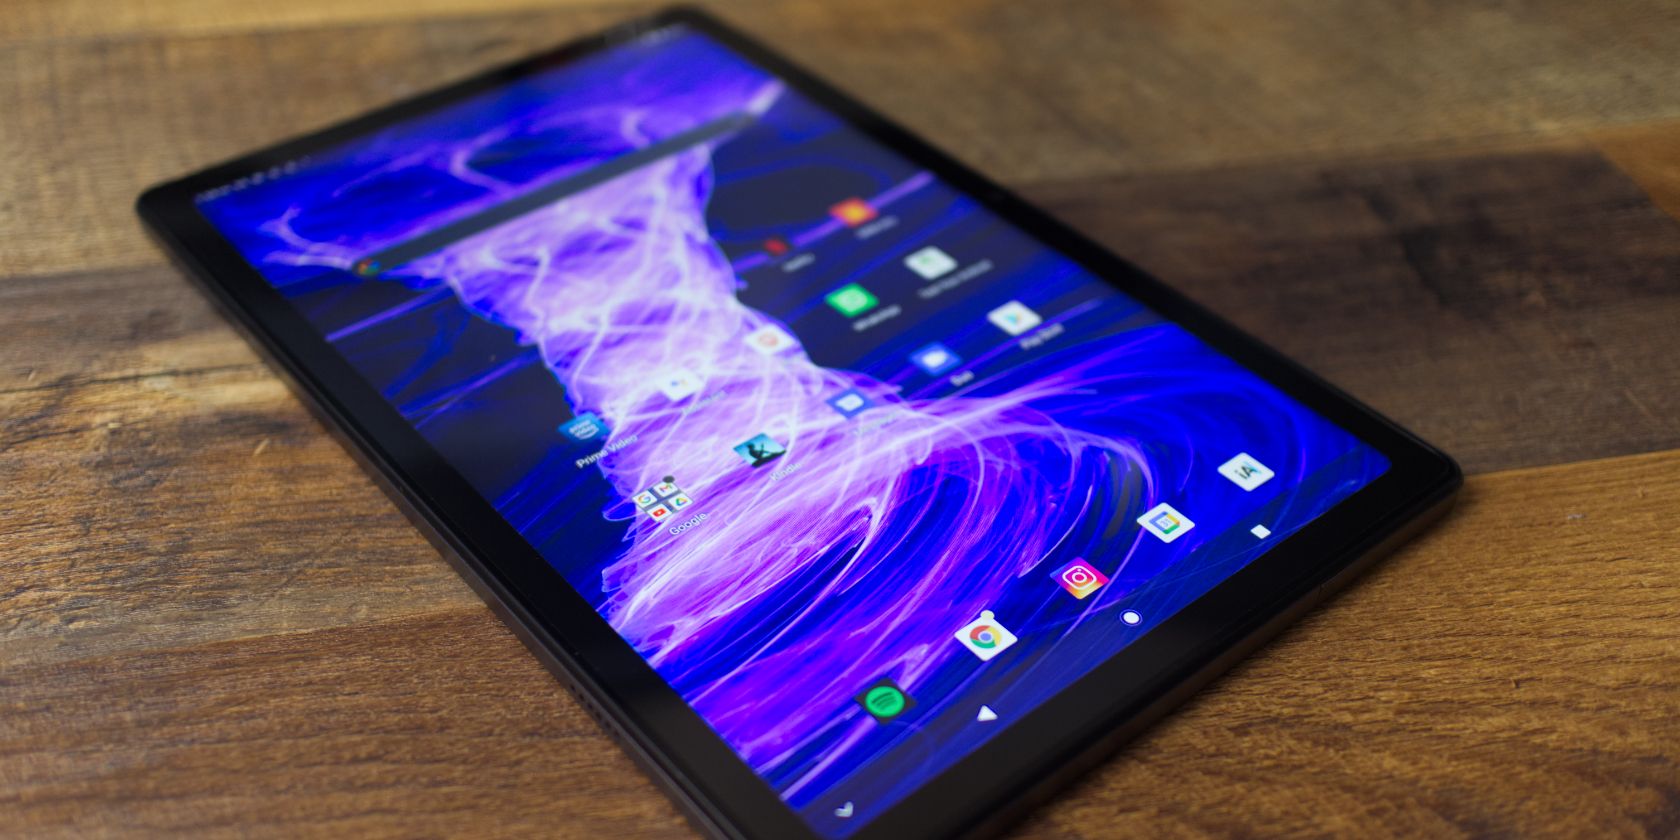 Teclast T40S arrives as new budget tablet with 2K IPS display